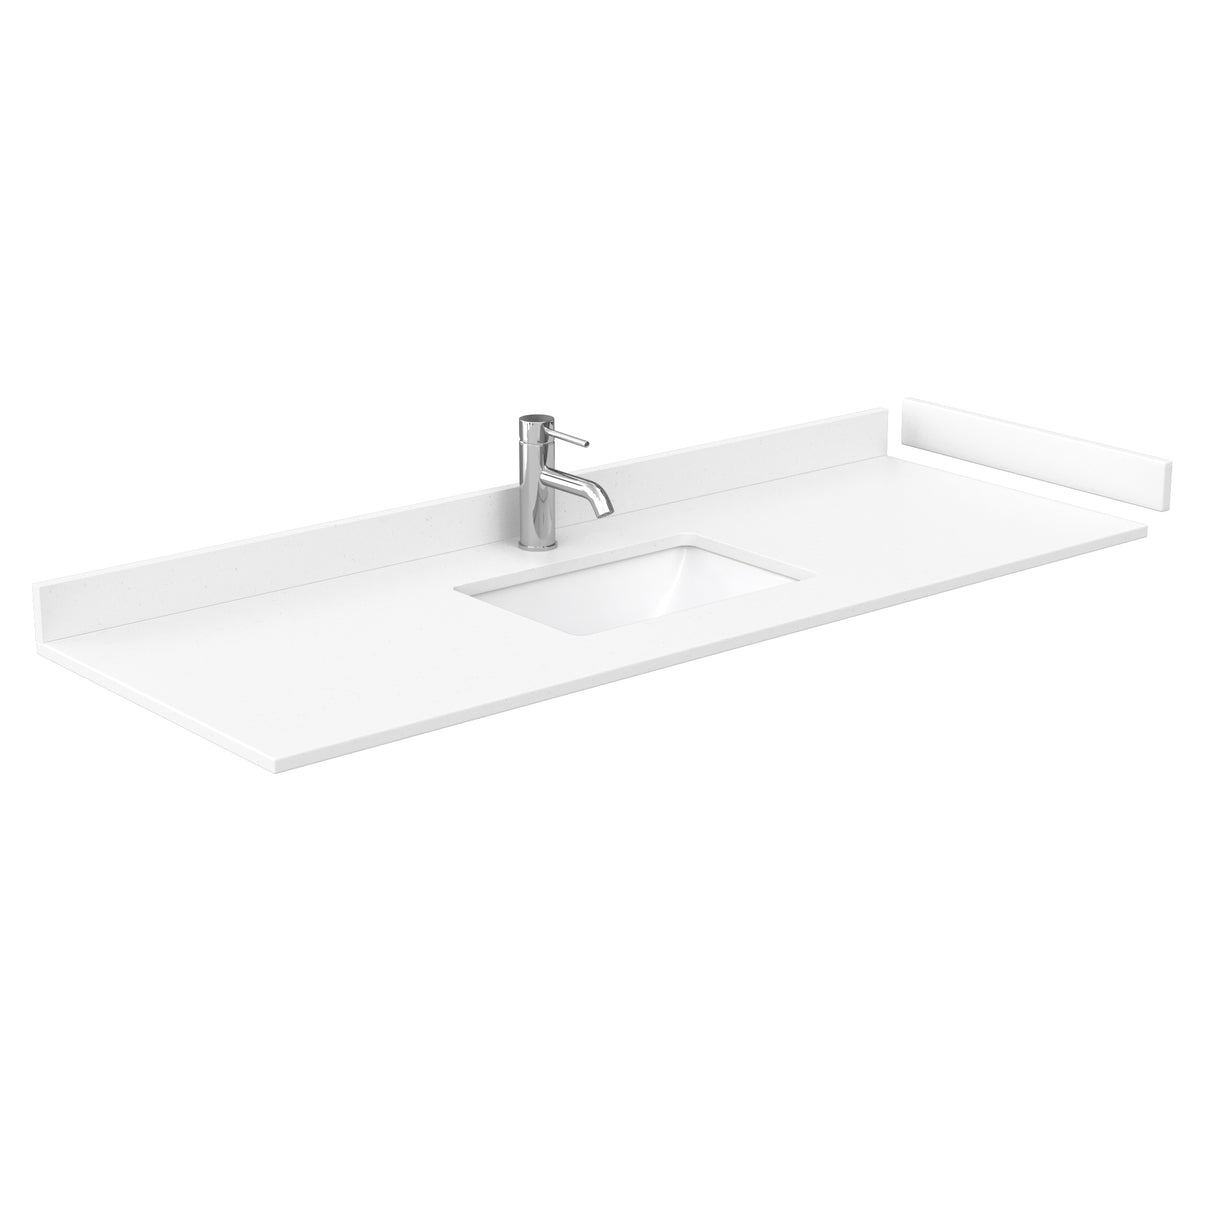 Sheffield 60 inch Single Bathroom Vanity in Light Green White Cultured Marble Countertop Undermount Square Sink Brushed Nickel Trim